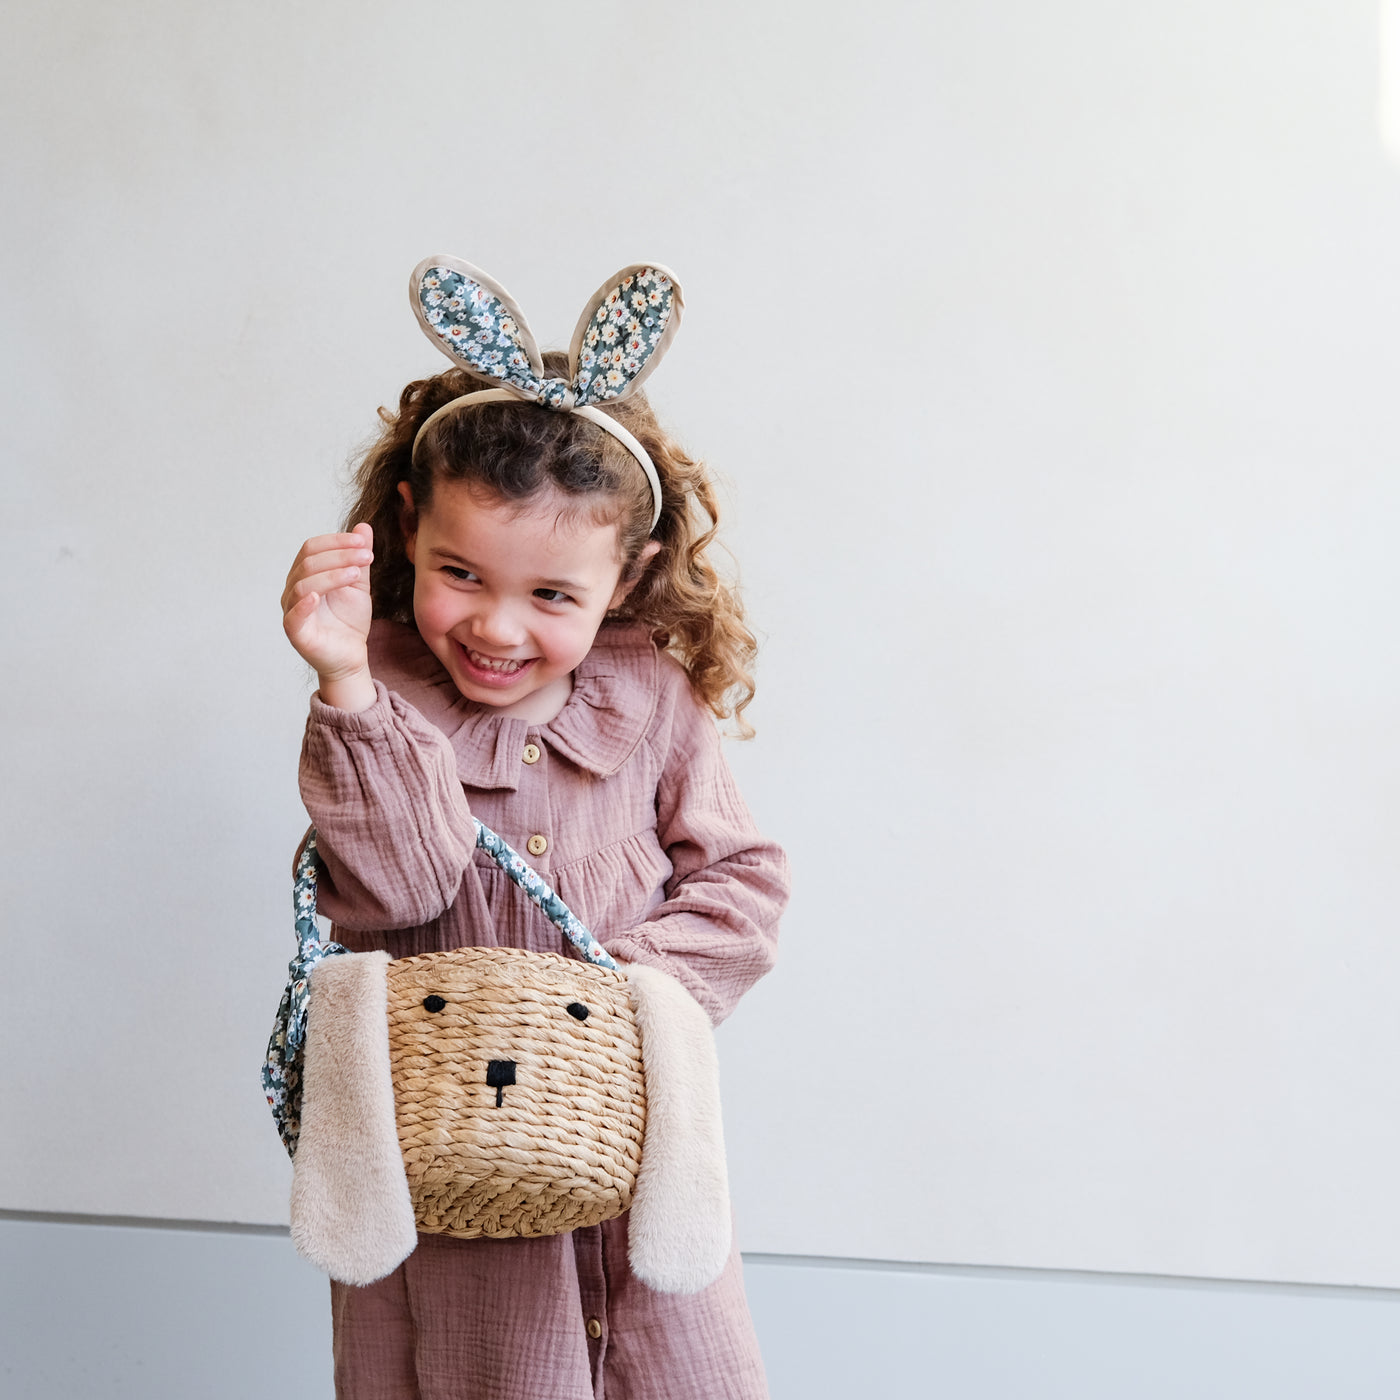 Little girl with a cheeky smile wearing bunny ears headband with pretty Easter basket